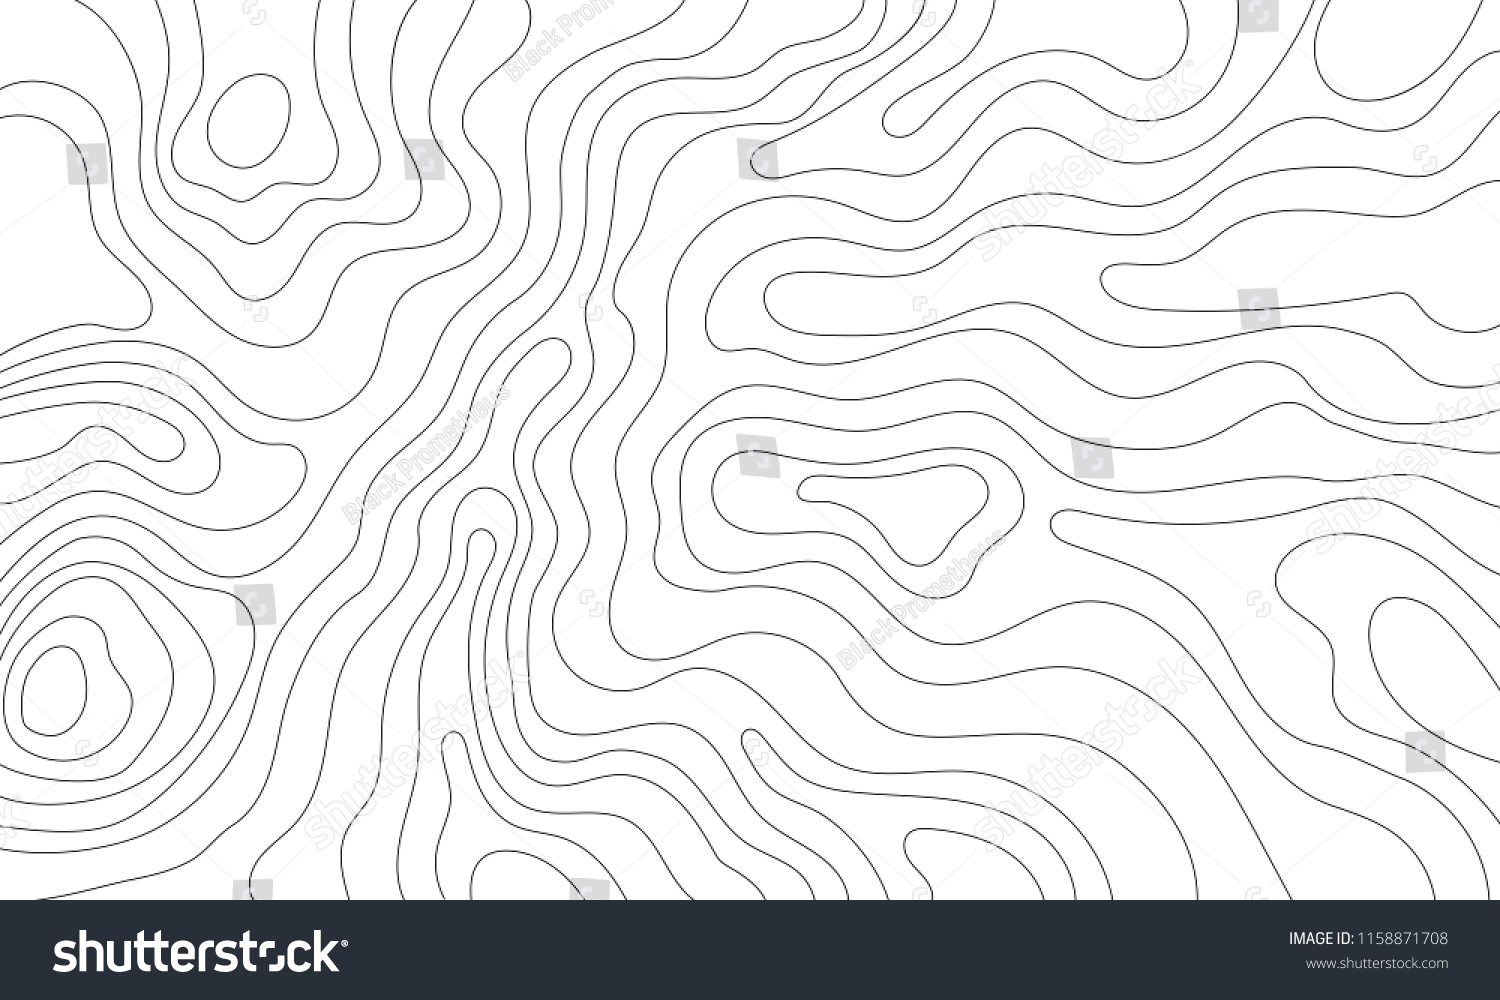 SVG of The stylized height of the topographic map in contour, lines. The concept of a conditional geography scheme and the terrain path. Design materials. Print image, Abstract bacground. Vector illustration svg